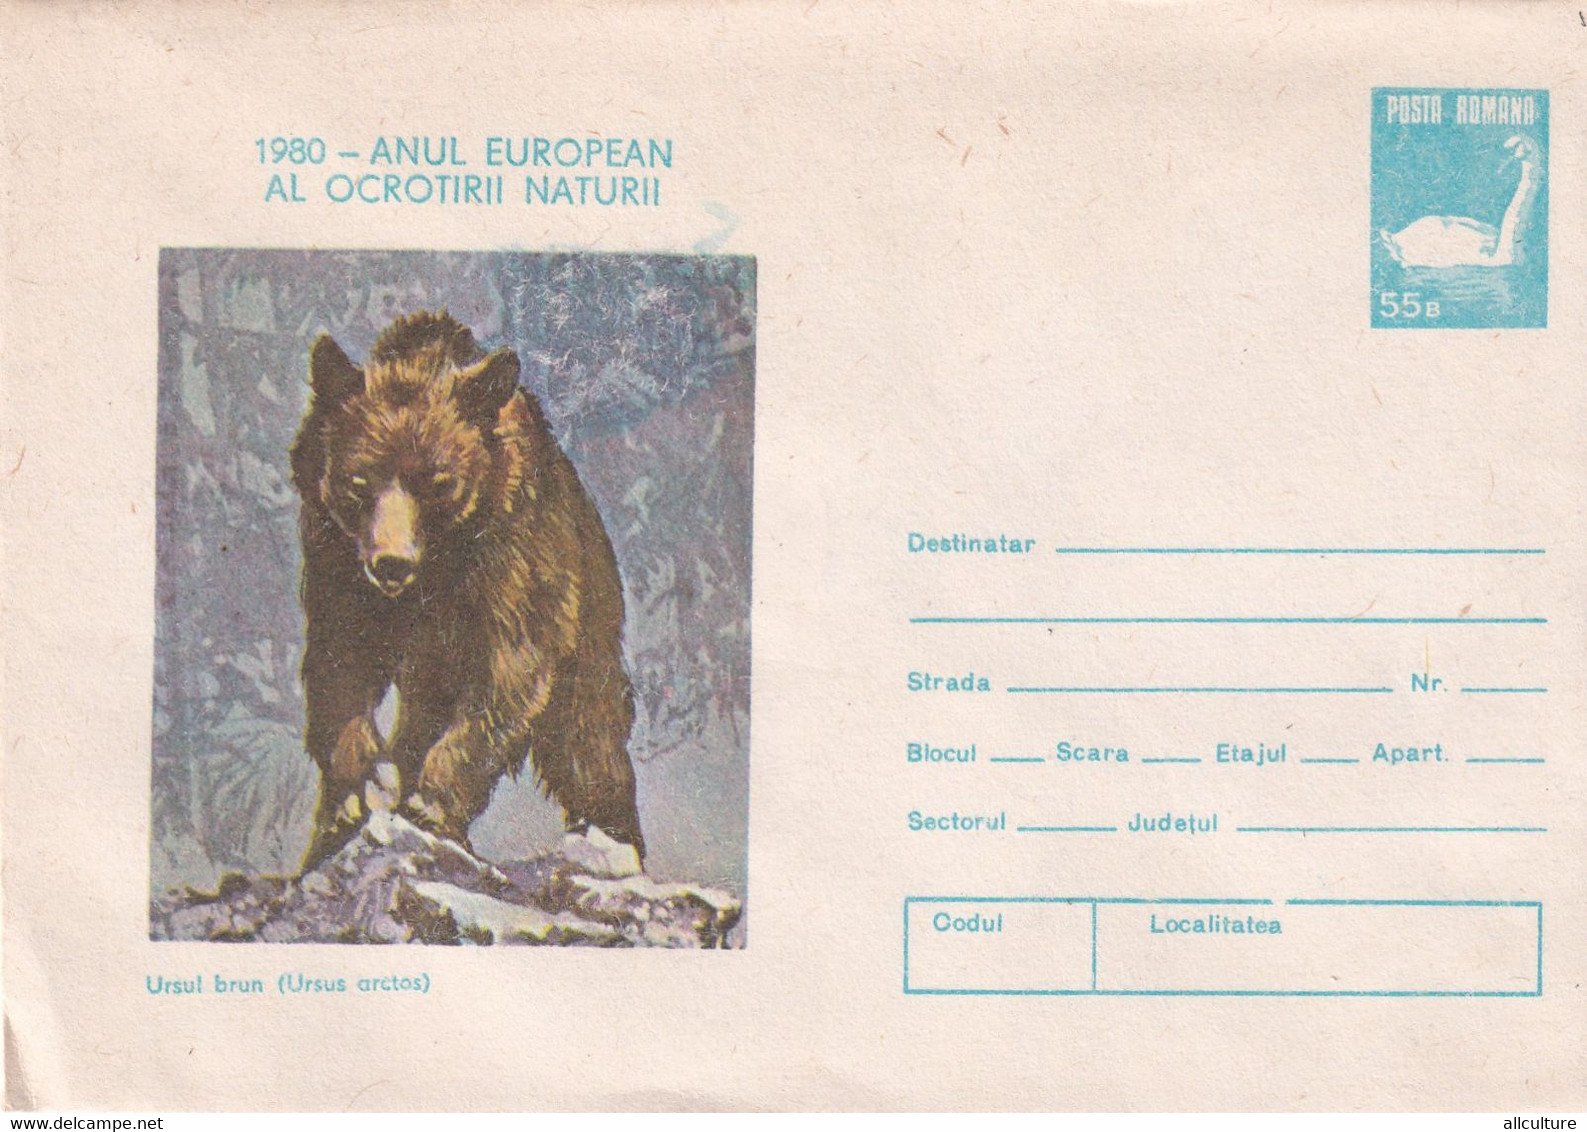 A3139 - The Brown Bear (ursus Arctos) European Year Of Nature Protection 1980 Romania Posta Romana Cover Stationery - Osos